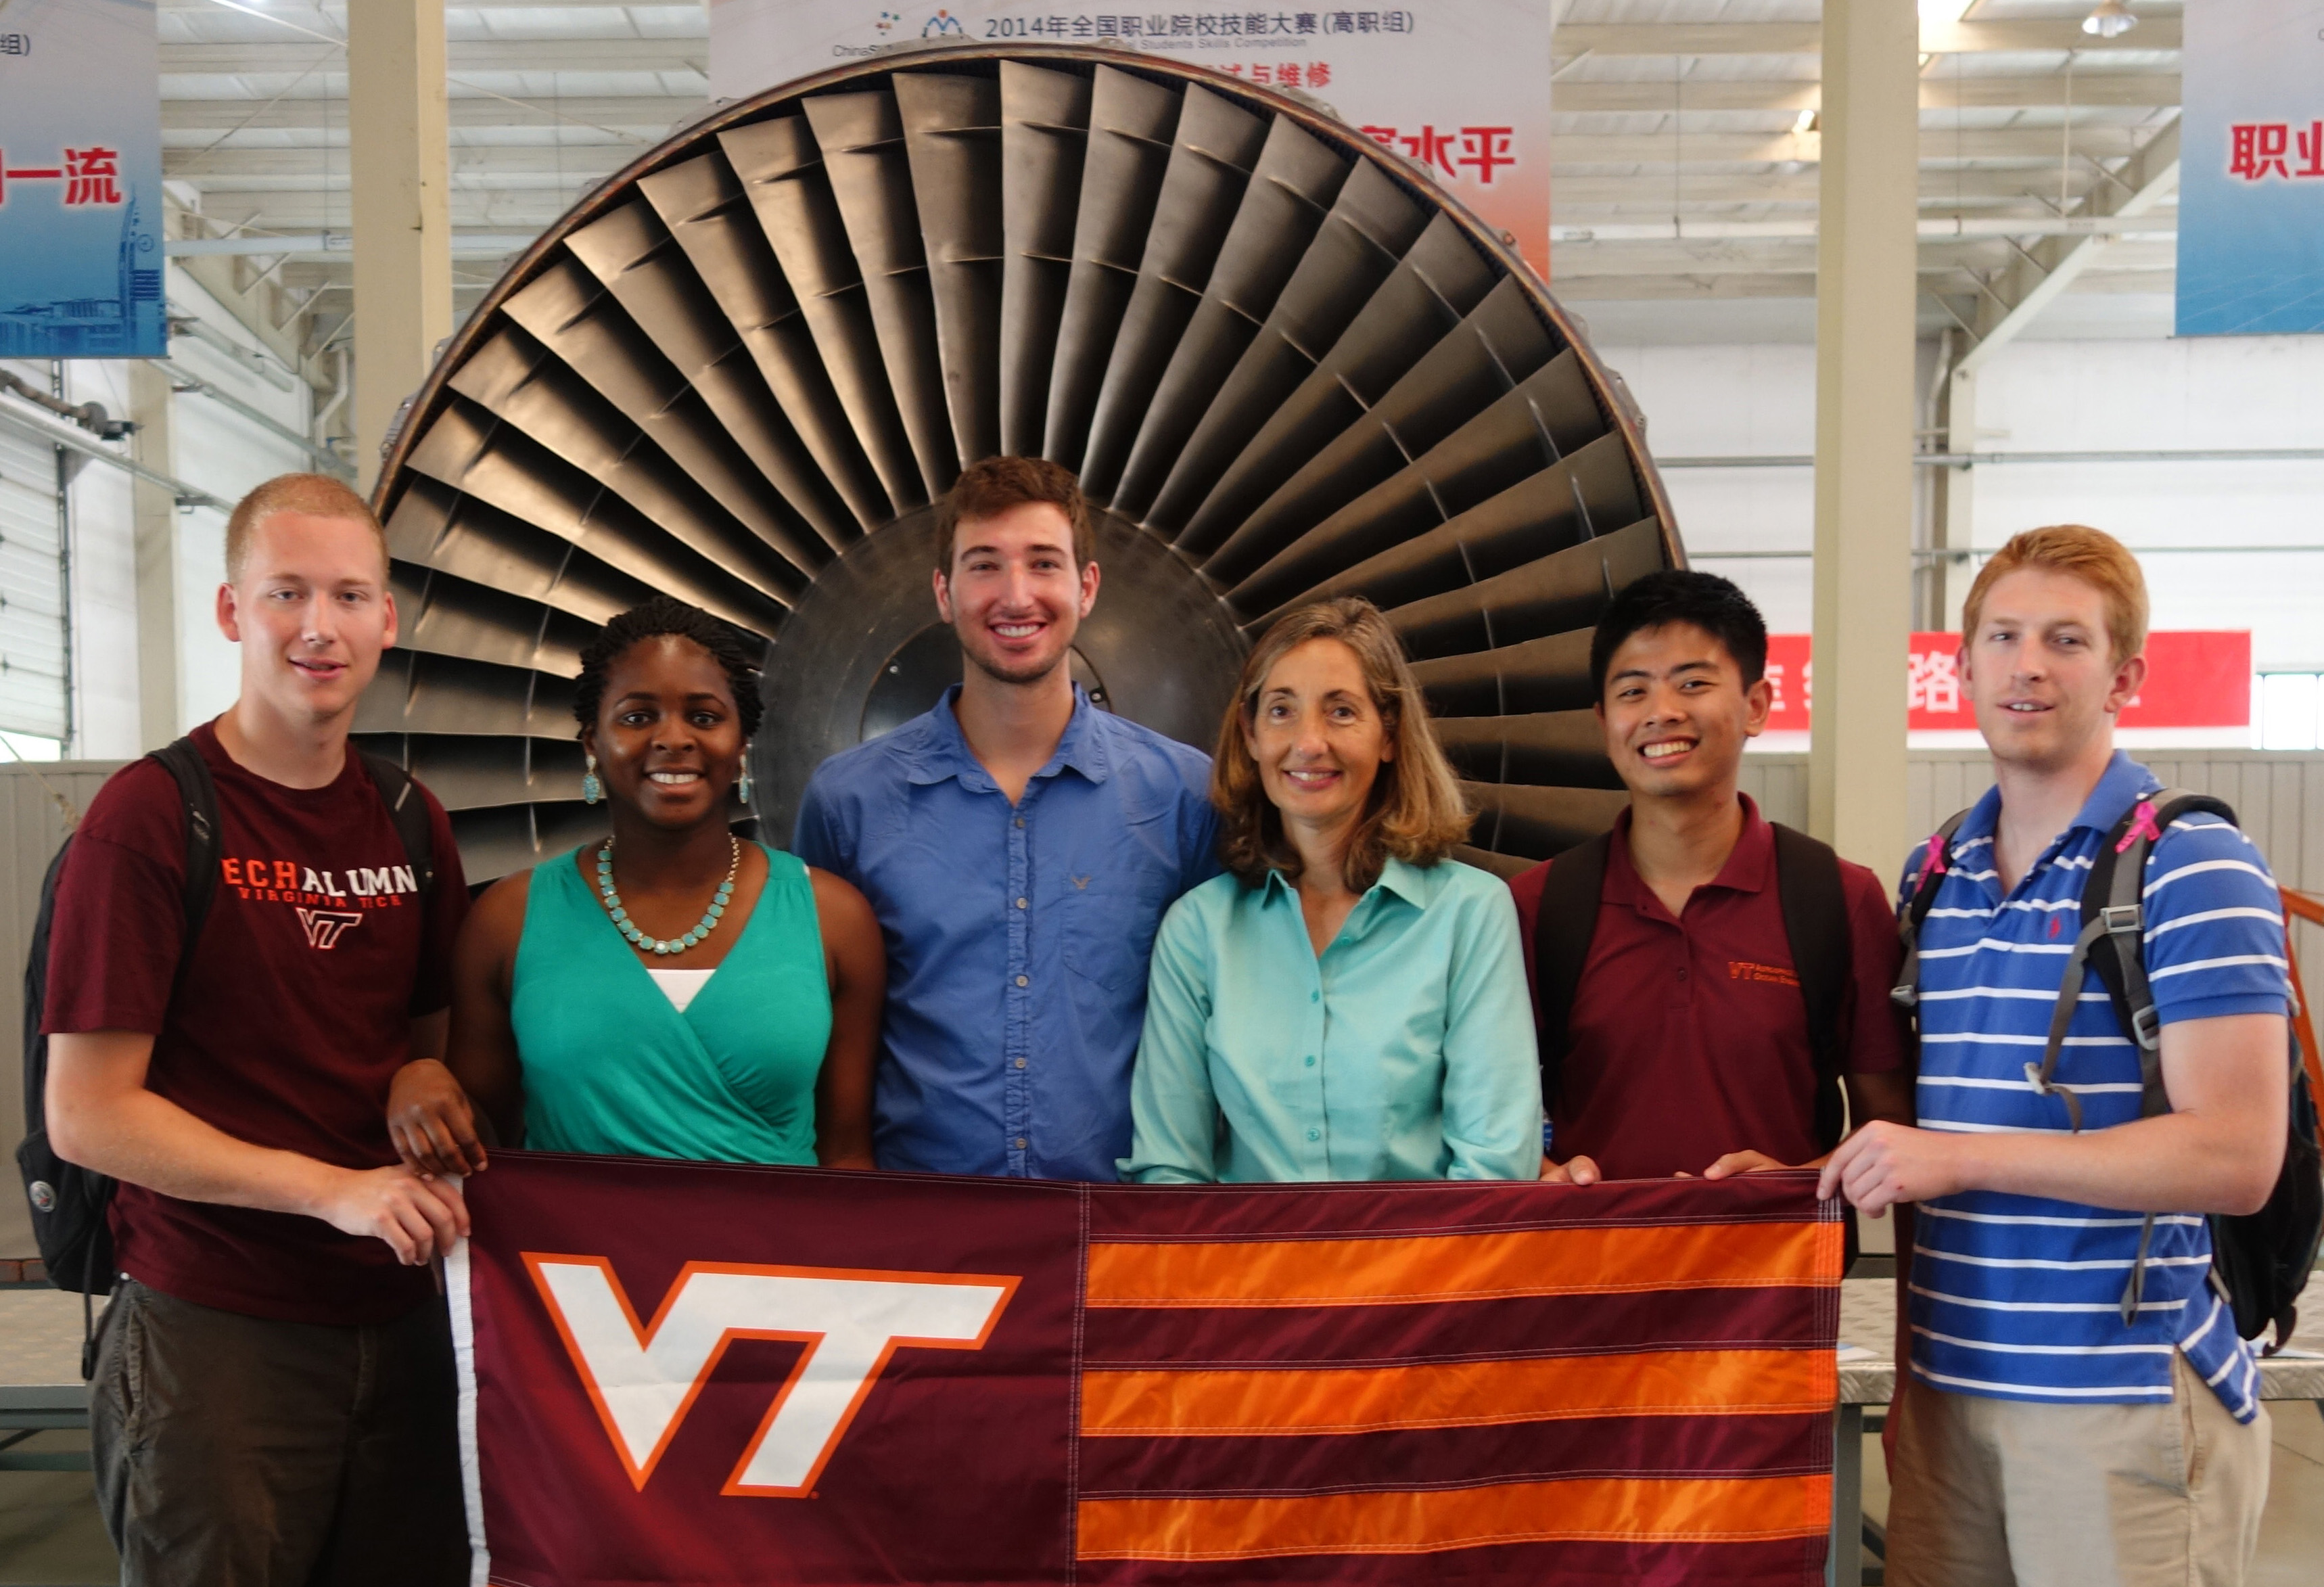 From left: Cody Reed, Adwoa Baah-Dwomoh, Eric Santure, Kim Lester, Howard Chung and Nick Pera; all of the college of engineering.